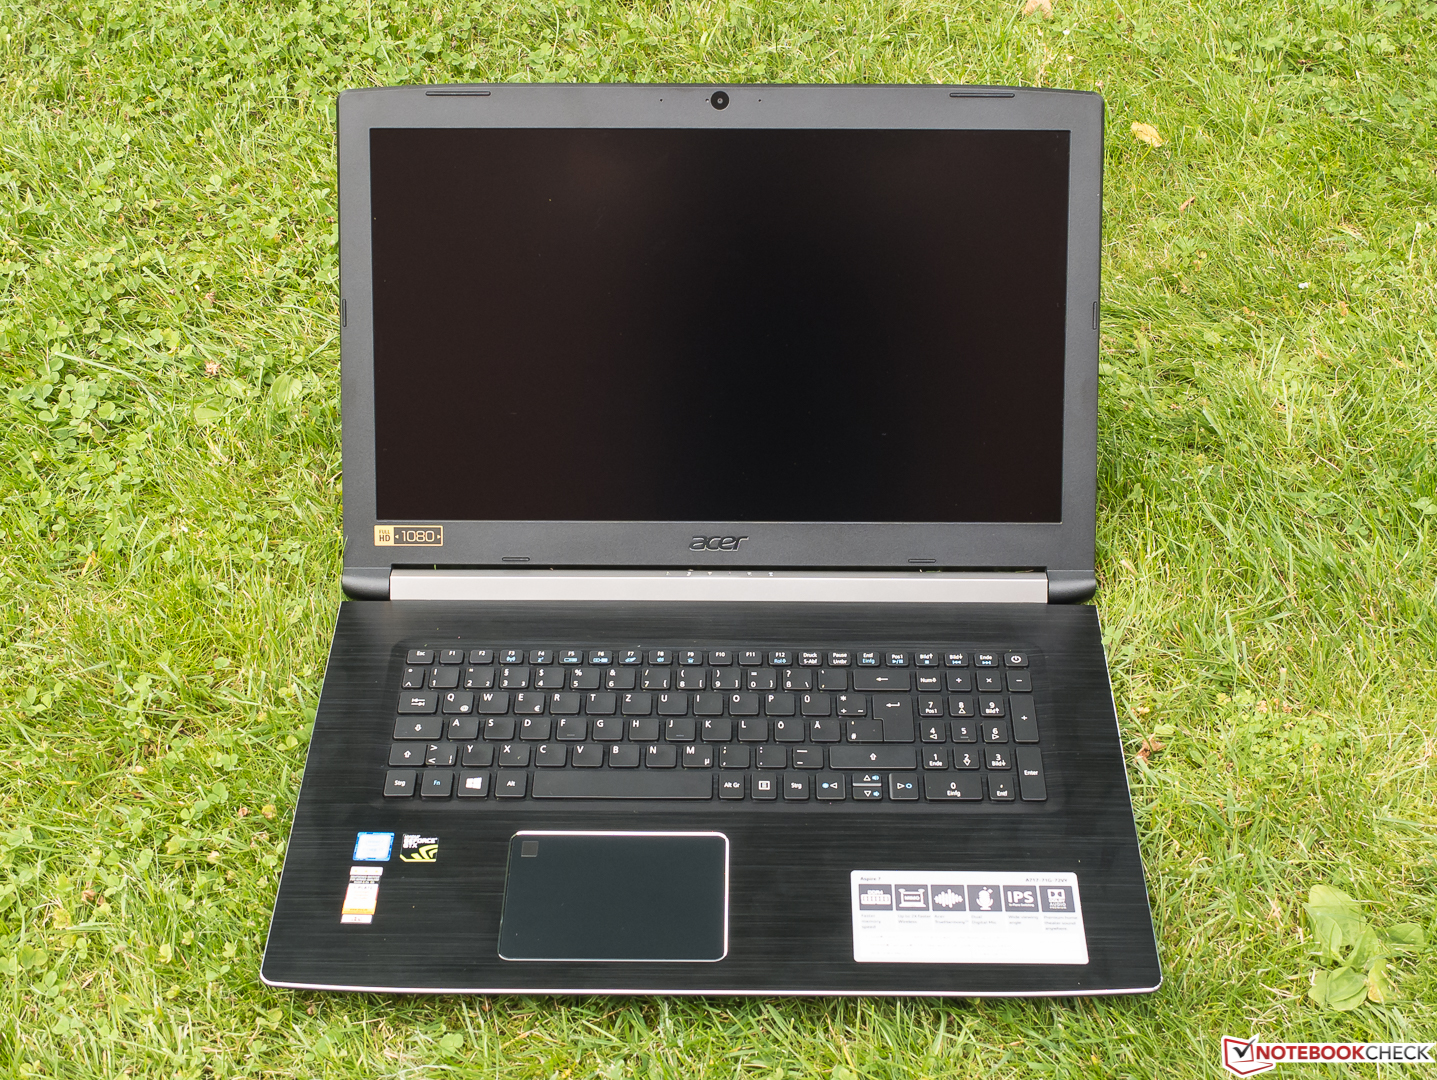 Acer Aspire 7 a717-72g. Acer Aspire i7. Acer Aspire a717-72g-700i. Acer a717-72g 54w4.